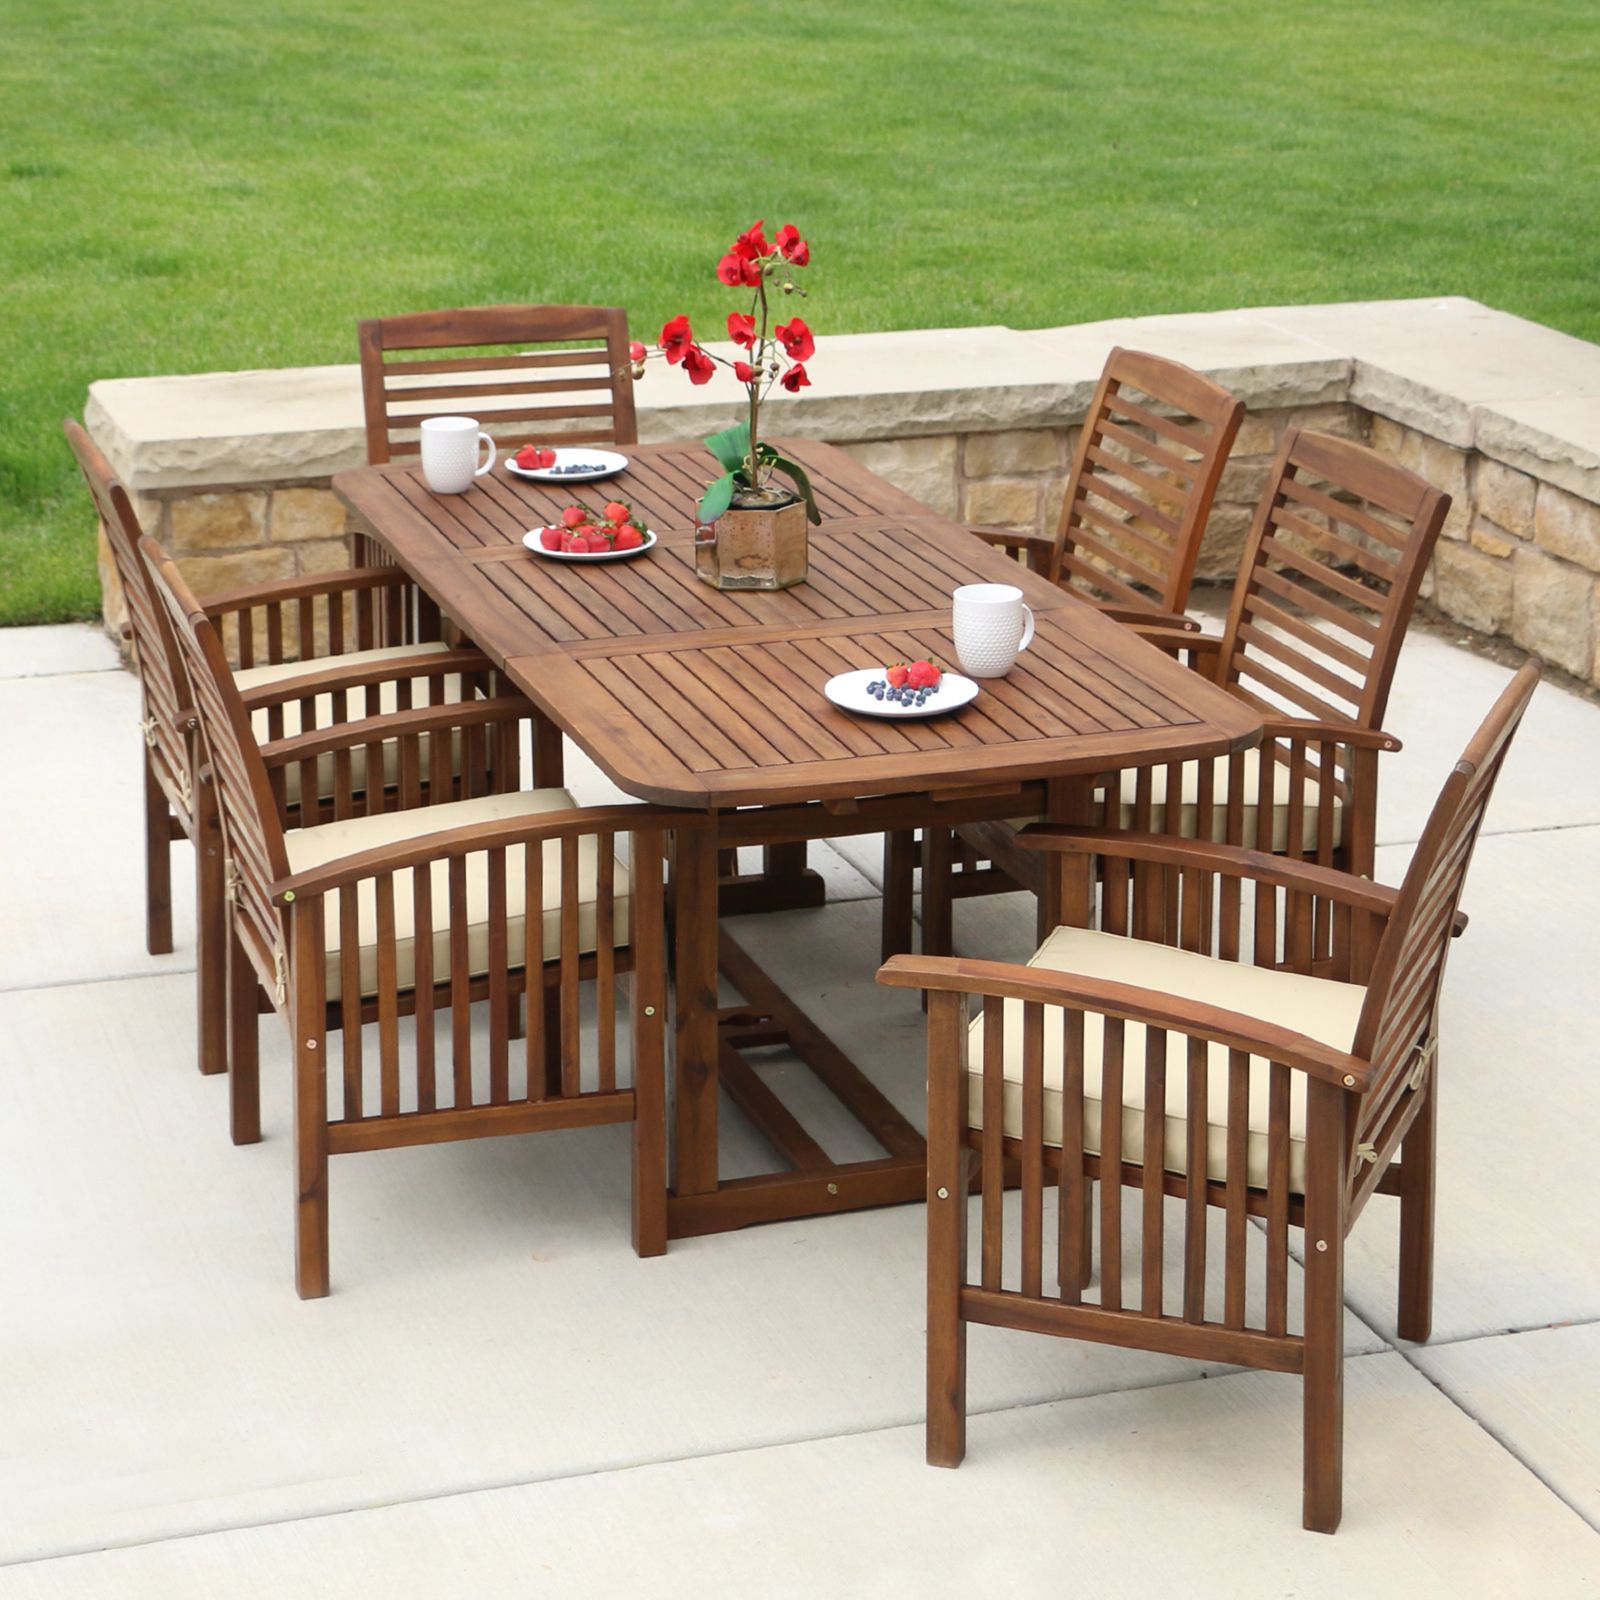 Well Known Extendable 7 Piece Patio Dining Sets Inside Walker Edison Acacia Wood 7 Piece Rectangular Patio Dining Set – Patio (View 4 of 15)